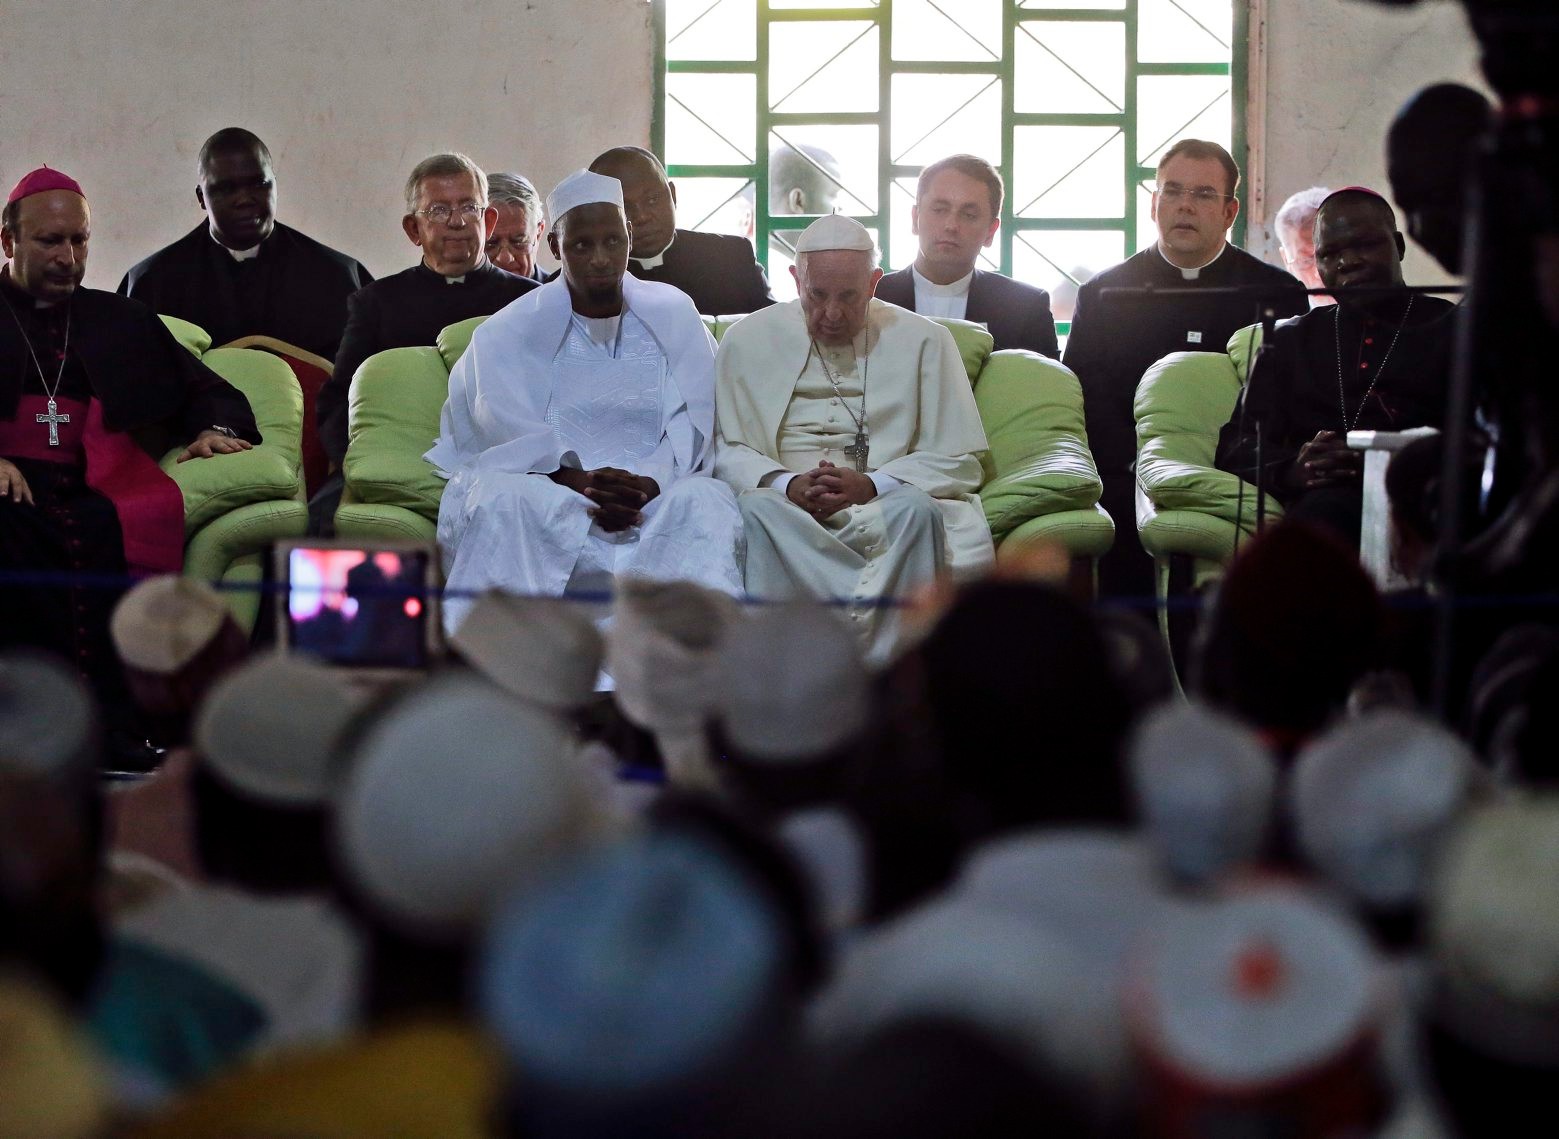 Pope Francis, flanked by the Imam Tidjani of the Koudoukou mosque, meets with the Muslim community at the Koudoukou mosque on the occasion of his visit, in Bangui, Central African Republic, Monday, Nov. 30, 2015. (AP Photo/Andrew Medichini) Africa Pope Central African Republic